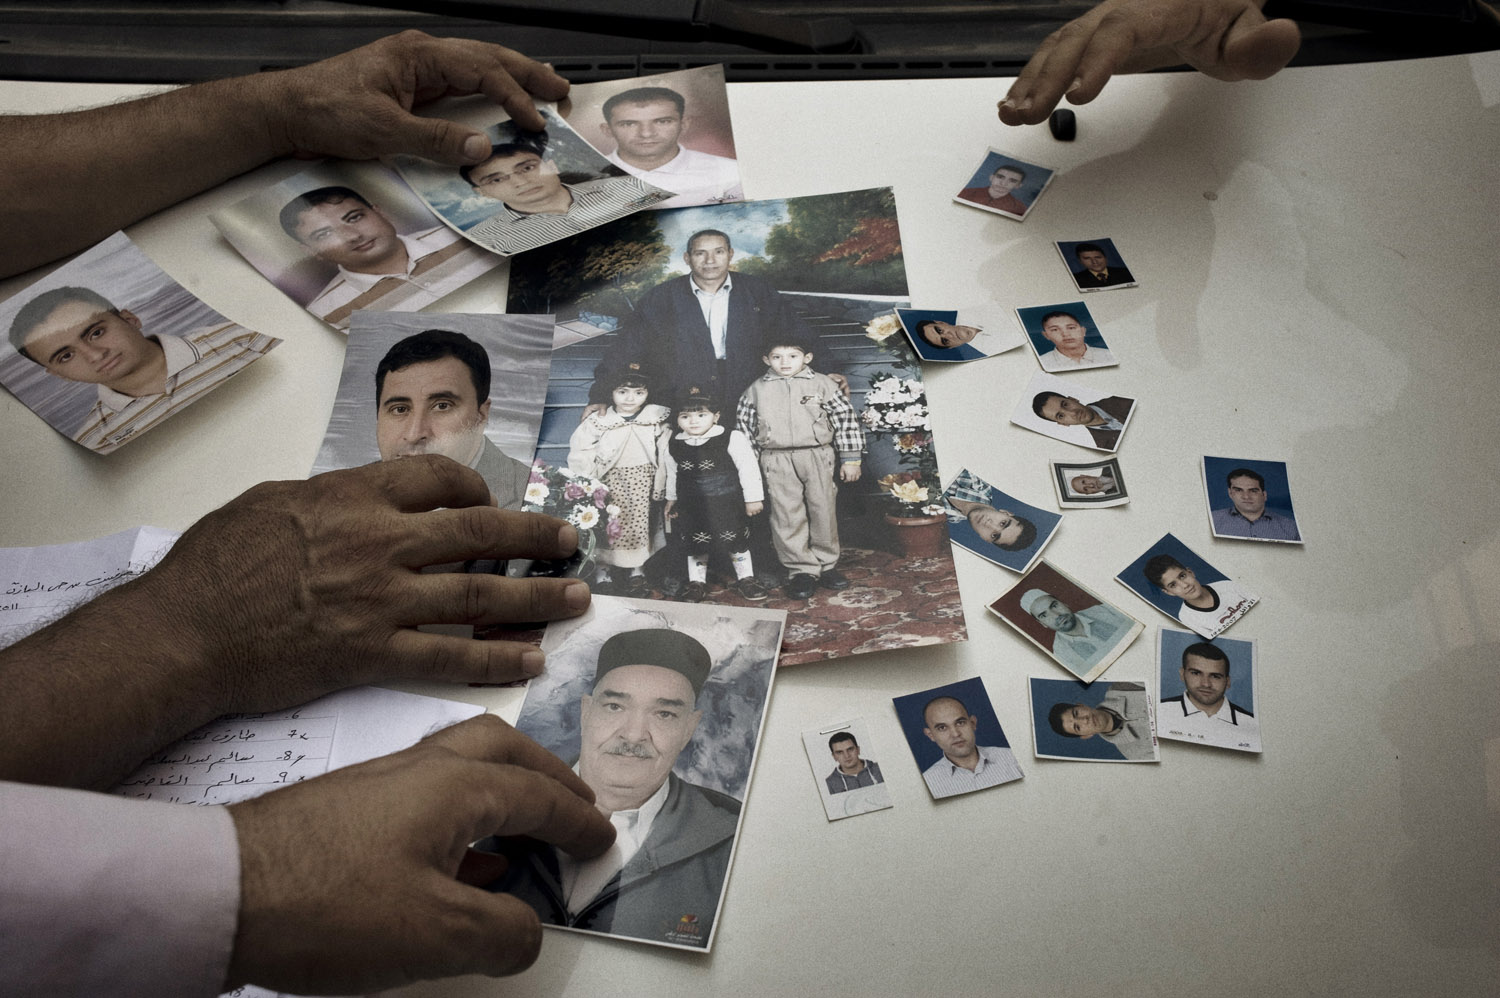 A man displays an assortment of photographs of men believed to have been killed by Gaddafi loyalists before rebels overtook Tripoli, August 27, 2011.